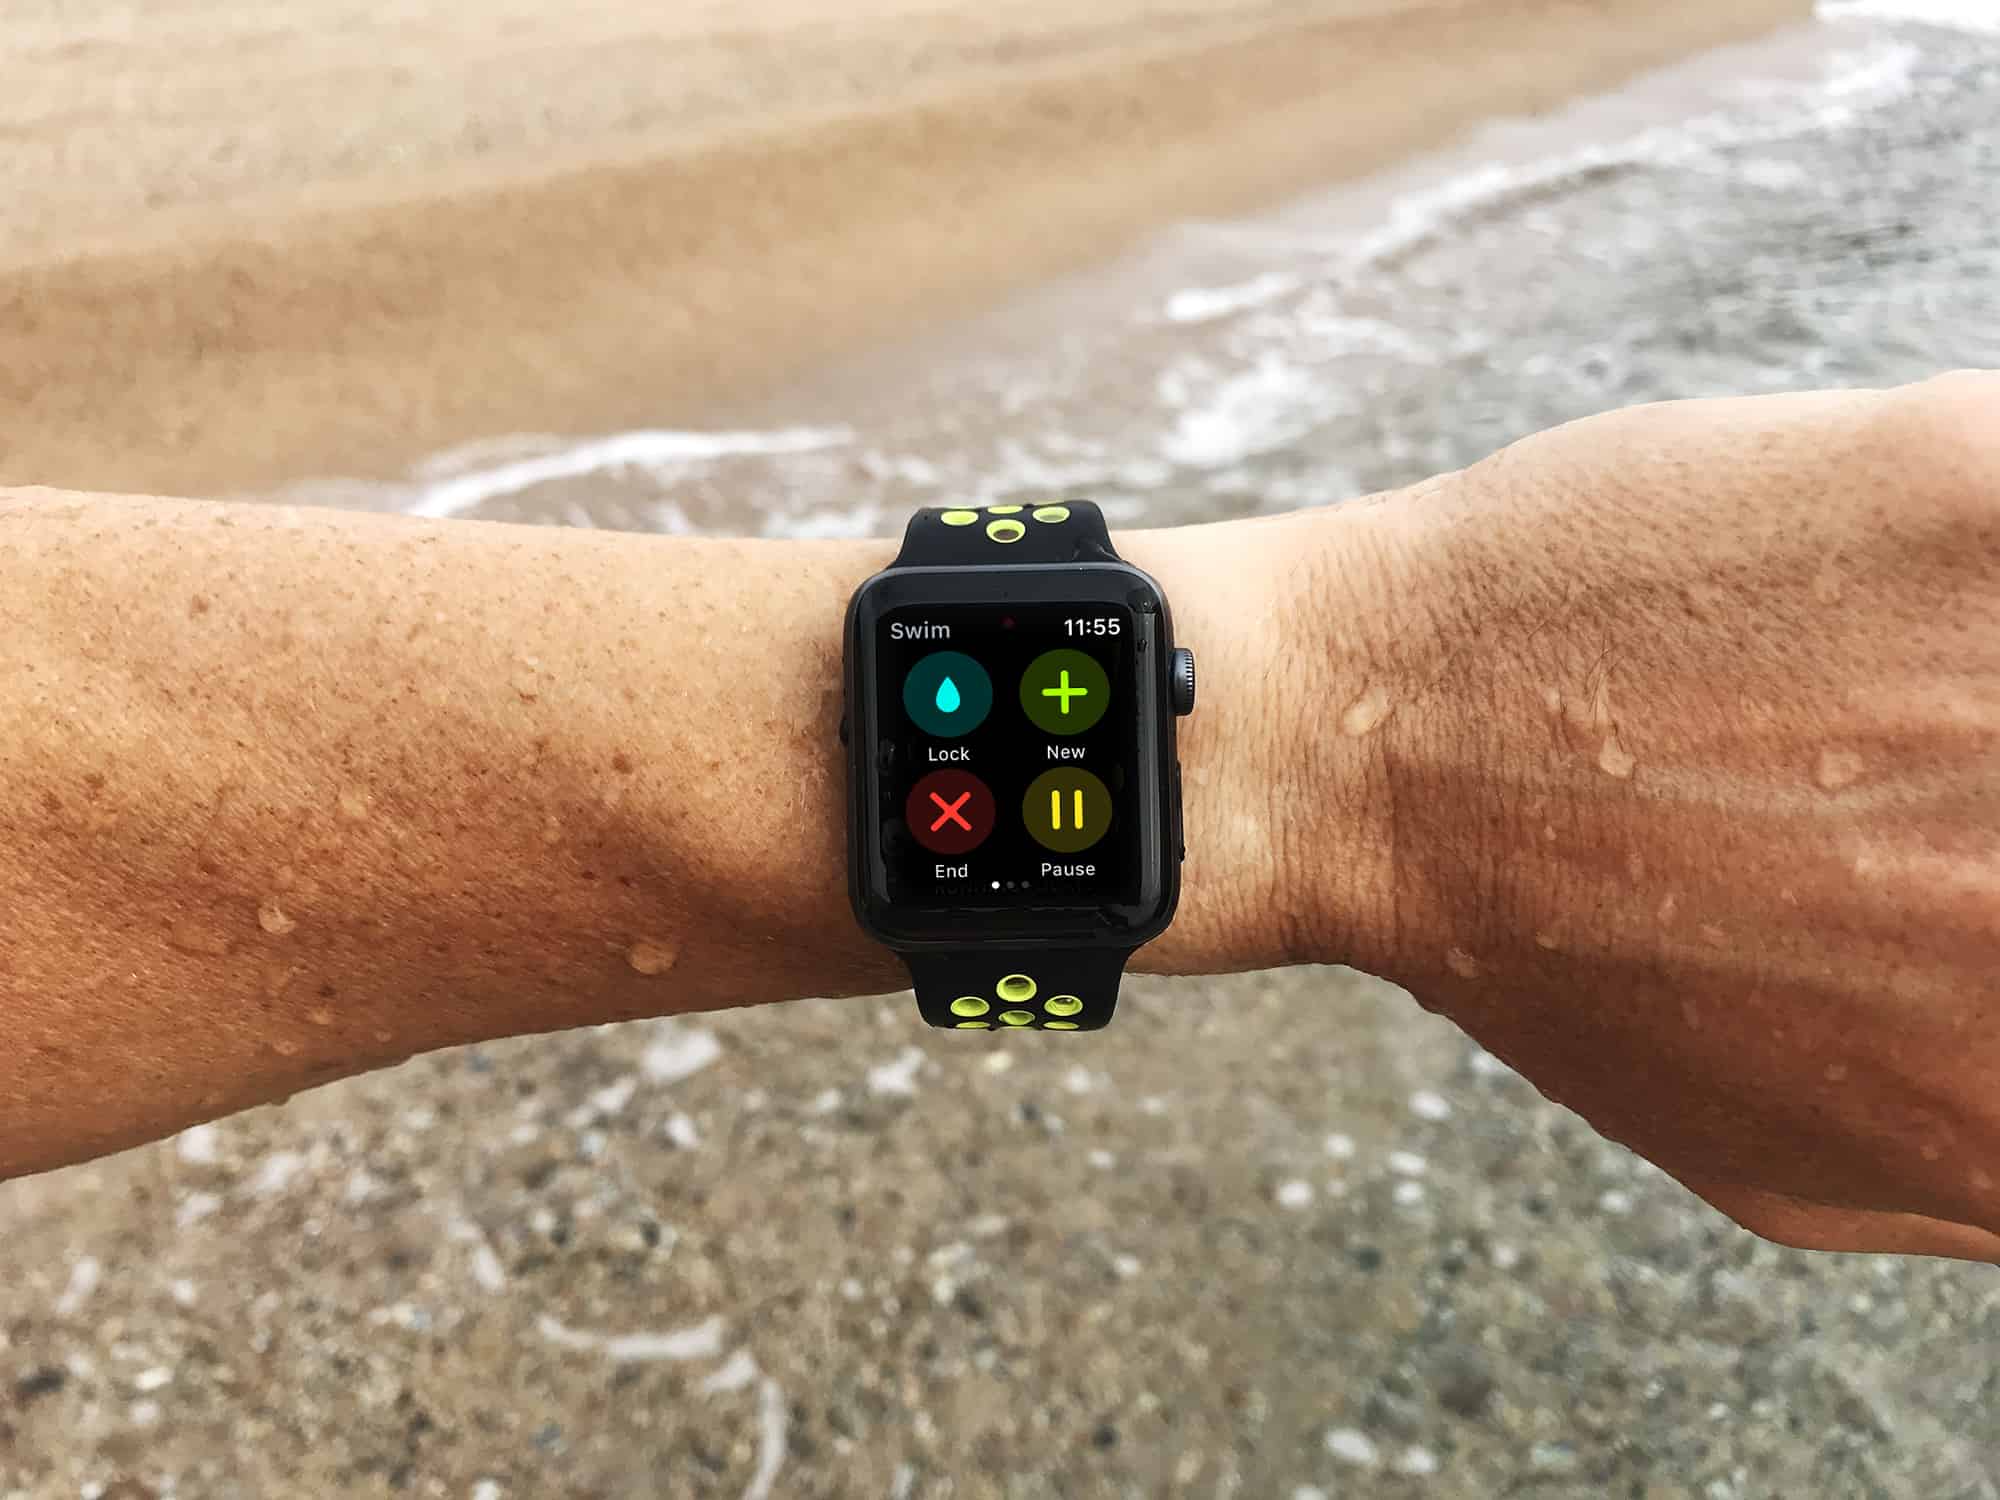 How to Fix an Apple Watch That Doesn't Count Swim Laps Correctly